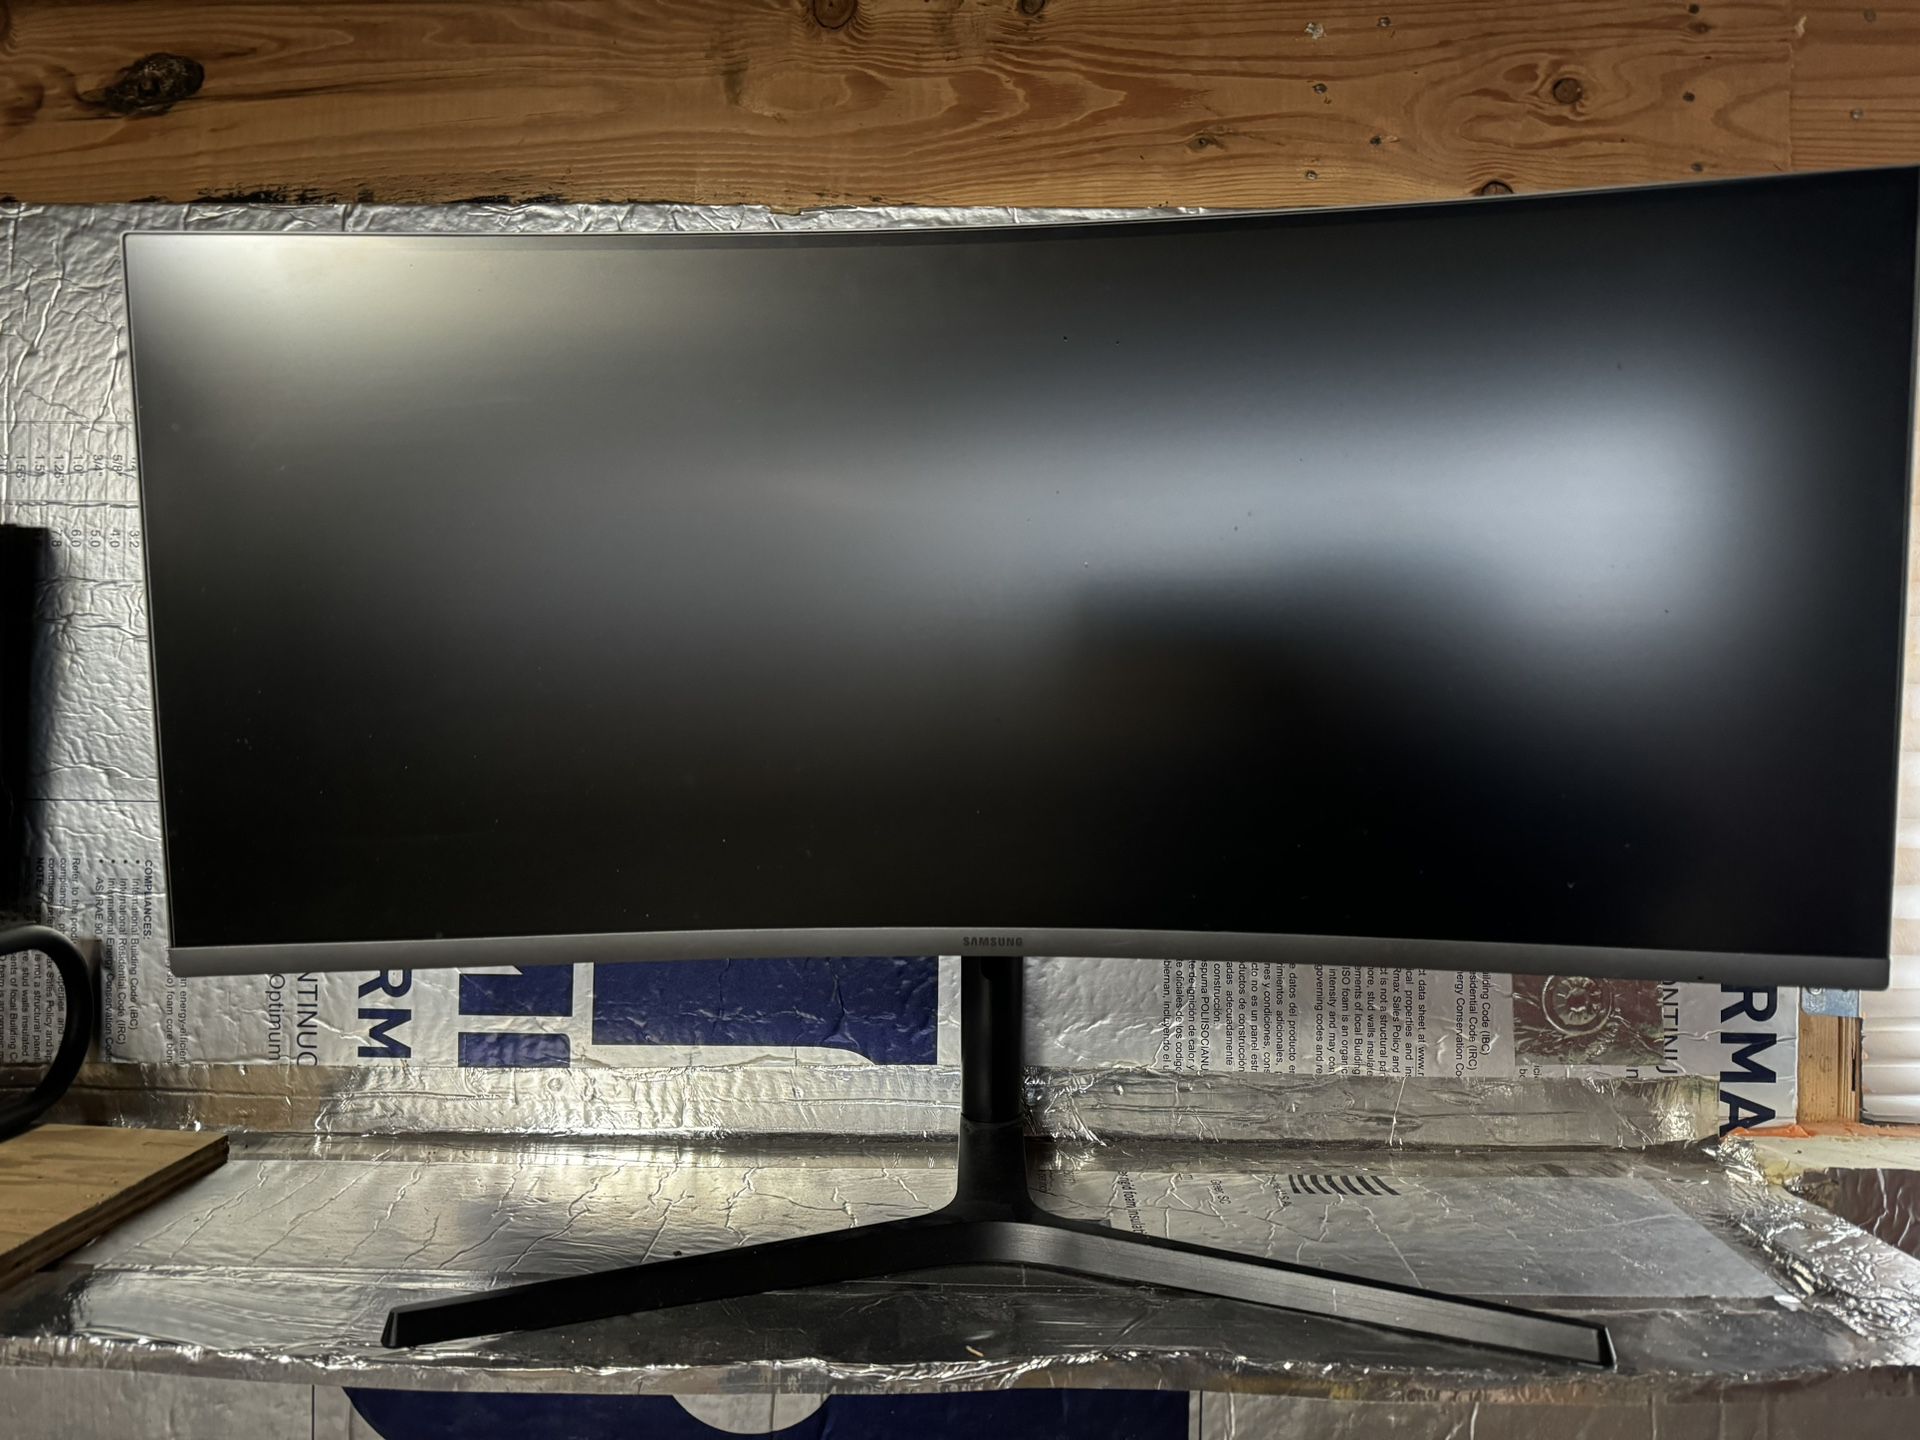 Samsung 34” curved monitor